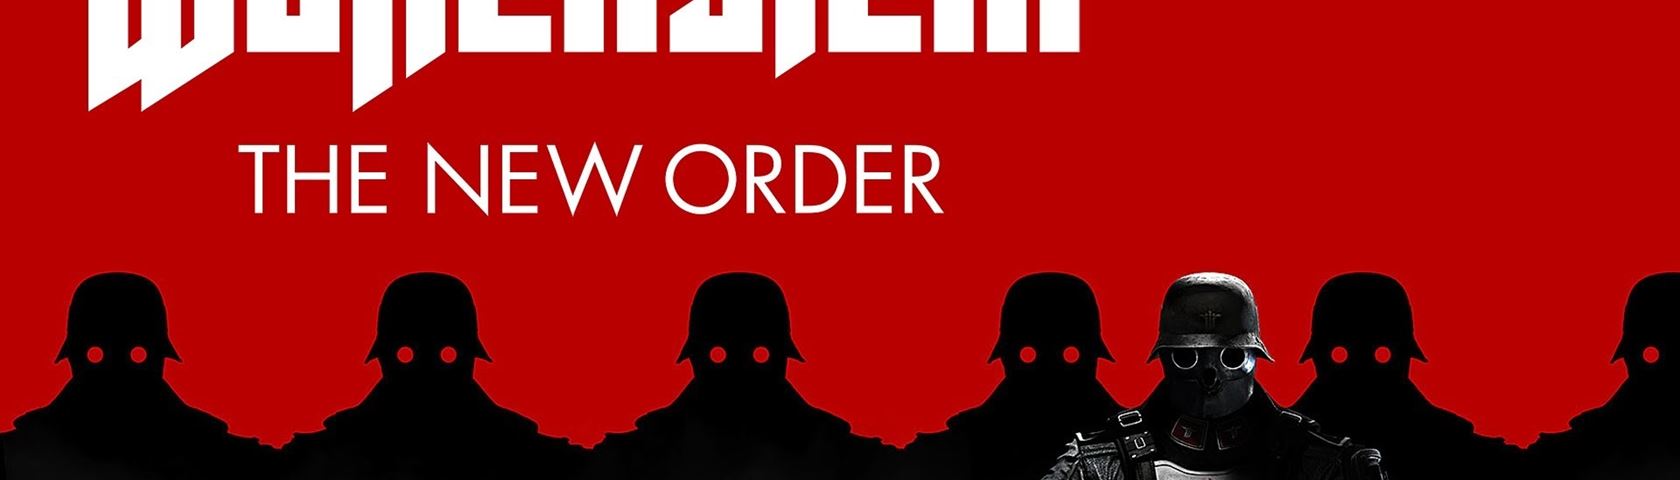 The New Order - Wolfenstein , HD Wallpaper & Backgrounds